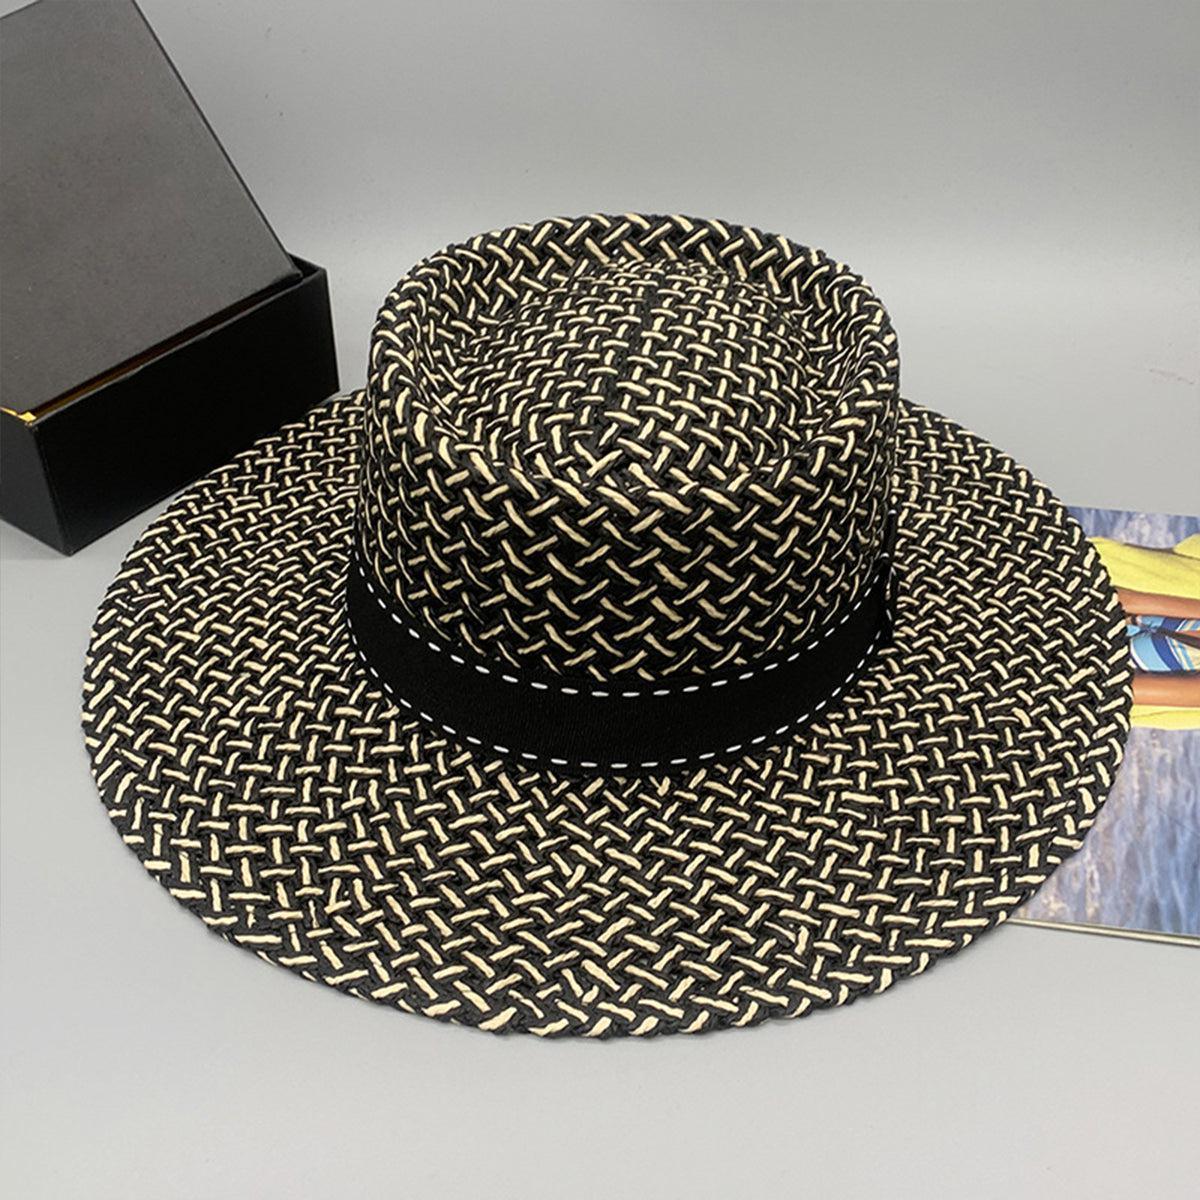 a hat sitting on top of a table next to a box